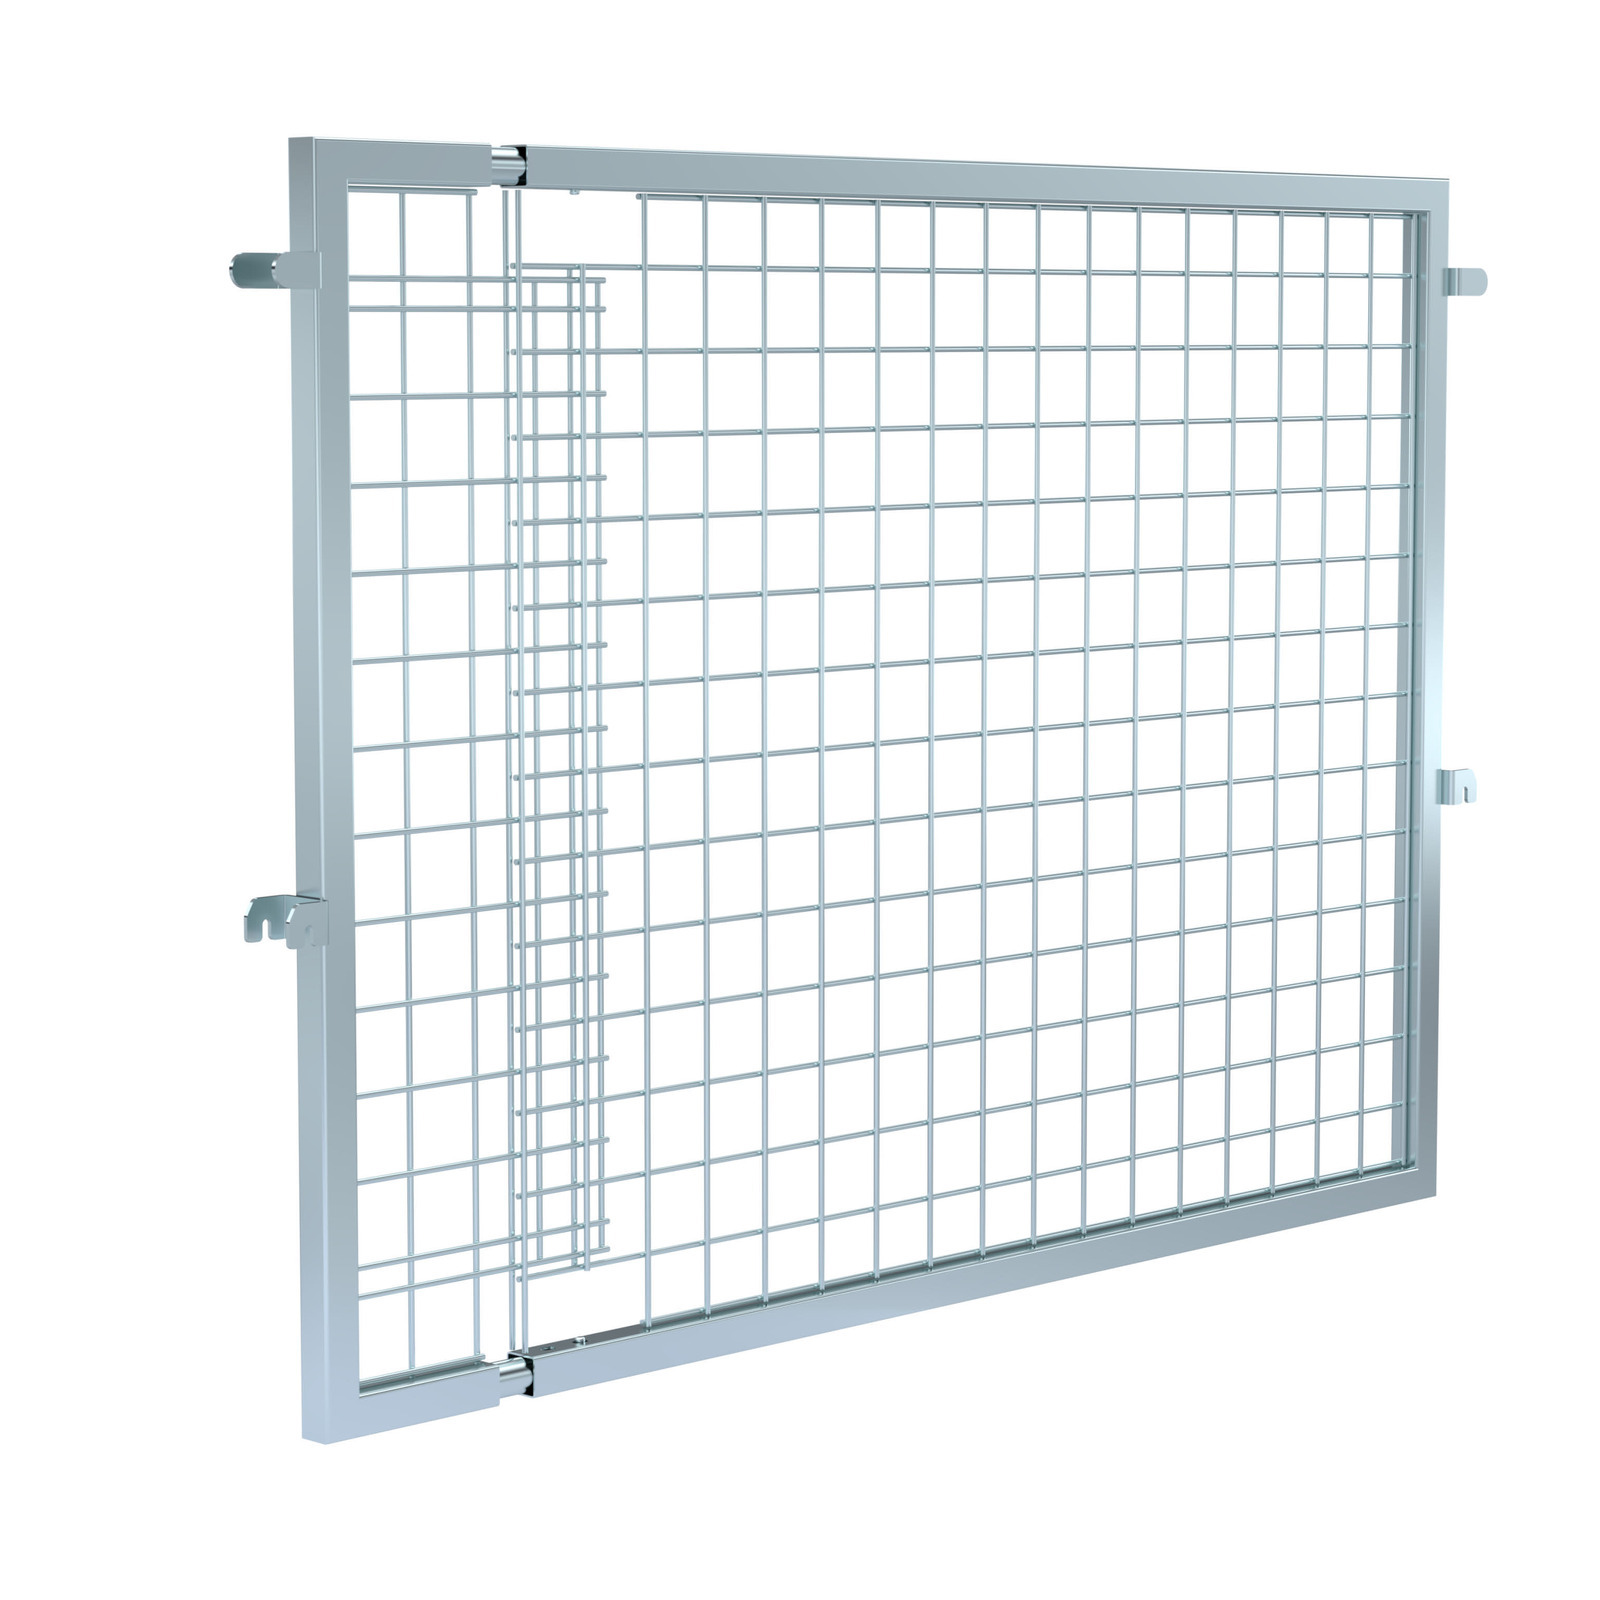 Full Height Divider to suit Storage Cage